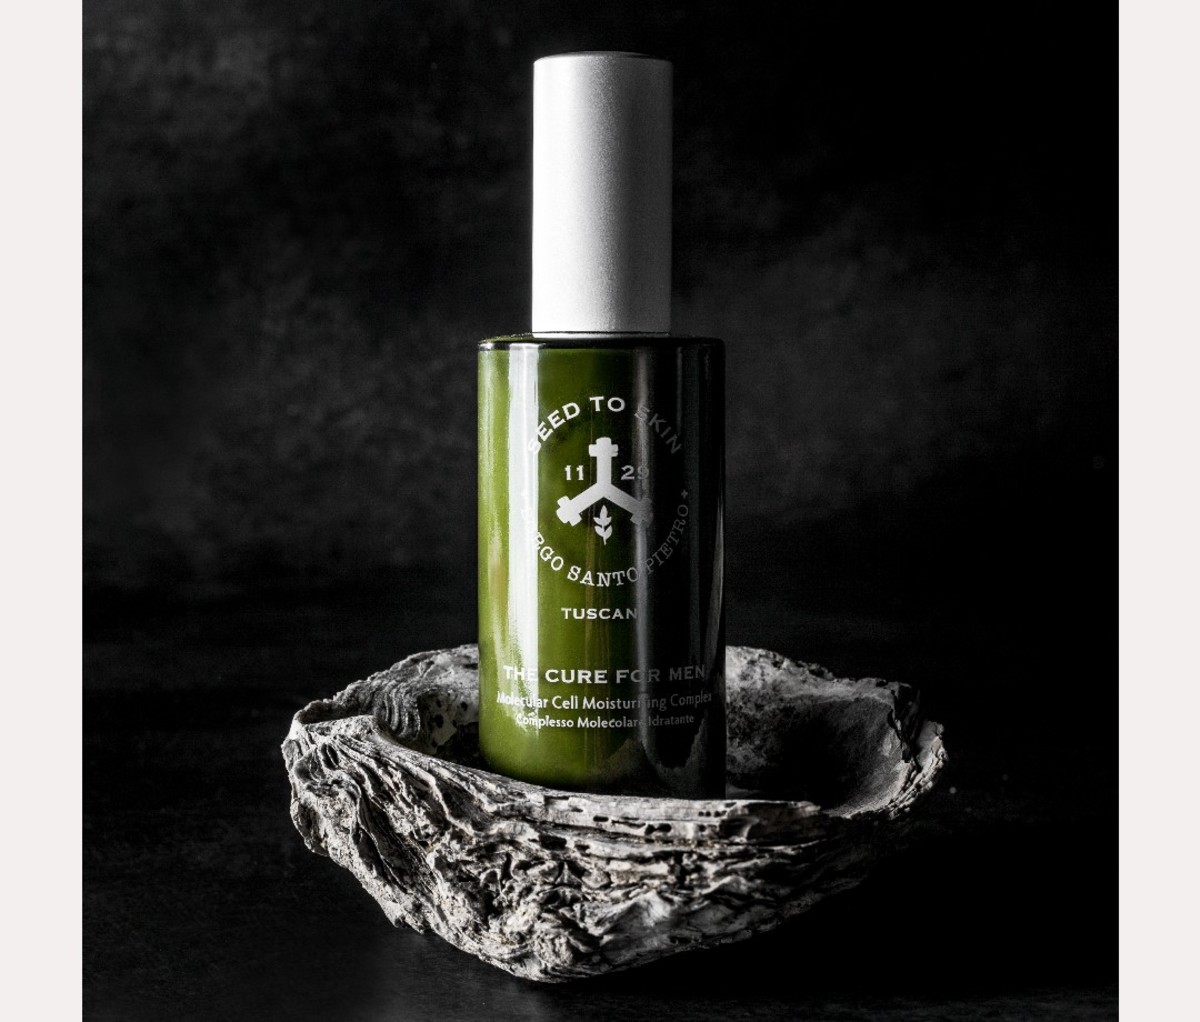 Seed to Skin Molecular Cell Moisturizing Complex